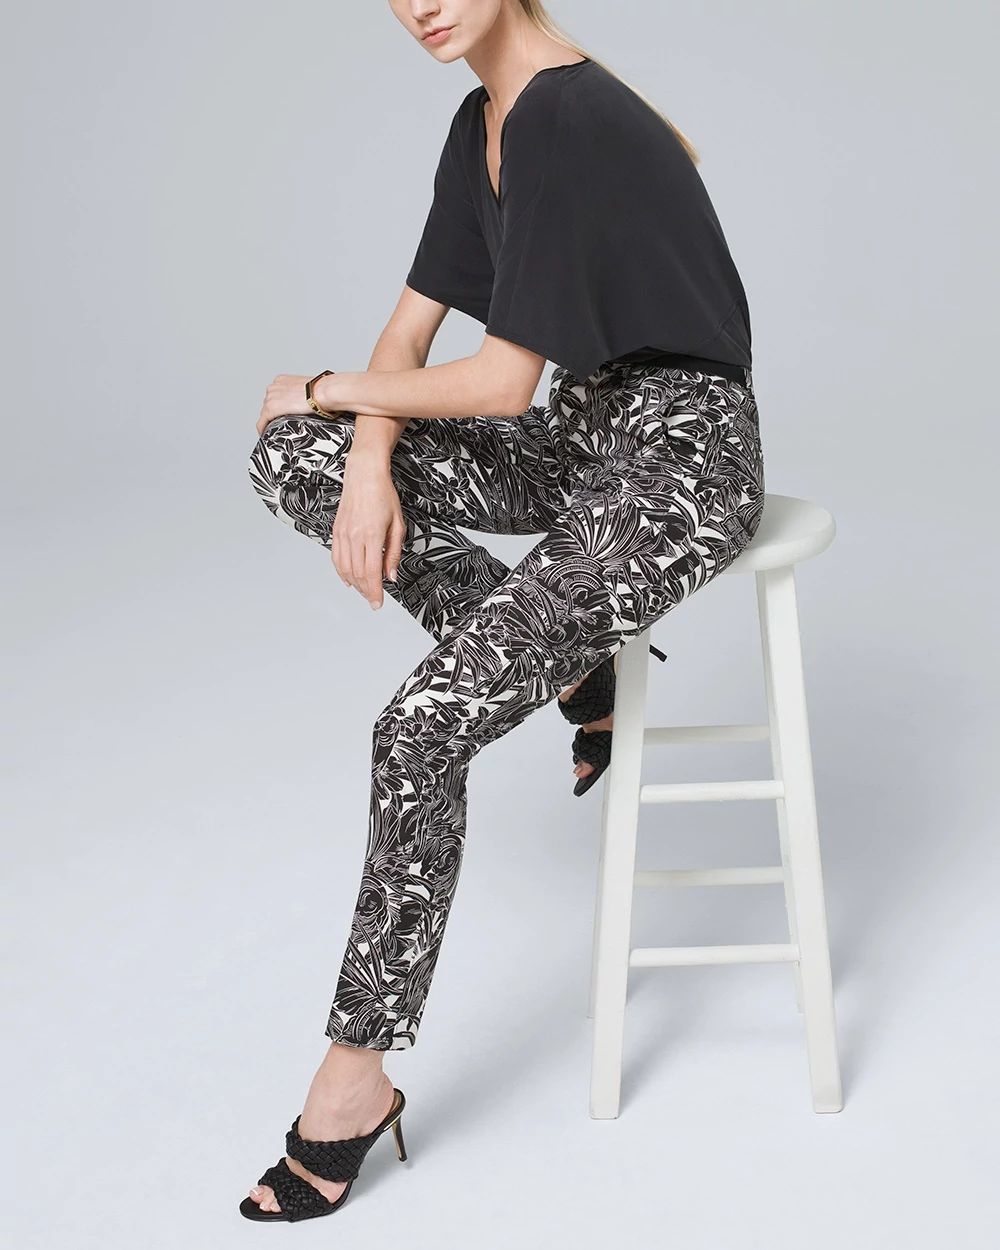 Tropical-Print Comfort Stretch Slim Ankle Pants click to view larger image.